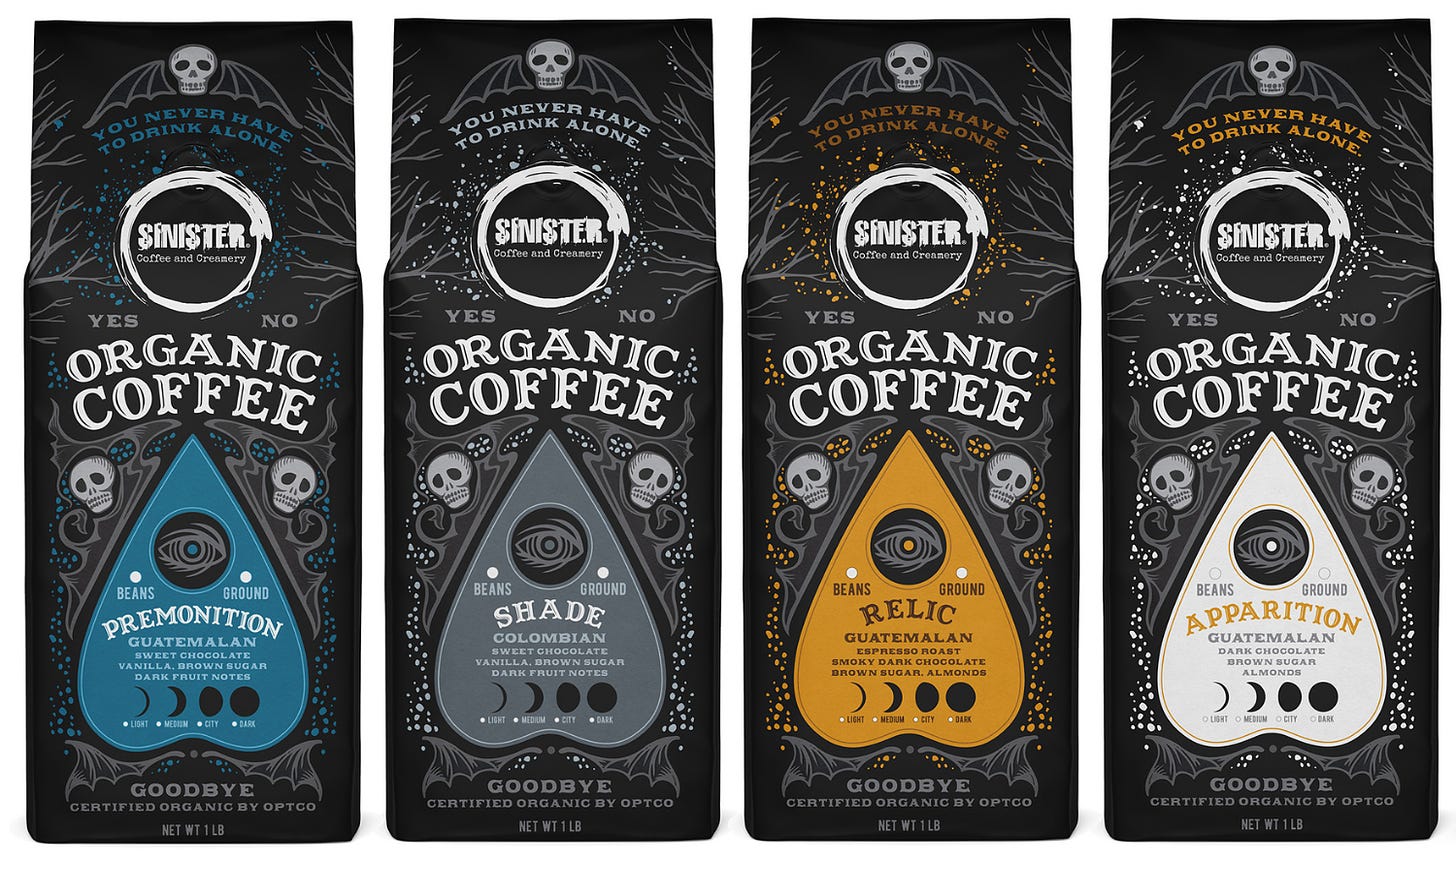 Side by side coffee bags with front view. A hand drawn gothic image featuring skulls and wings creates an homage to the Ouija board. The coffee details are outlined inside board indicator that is a different color on each bag.